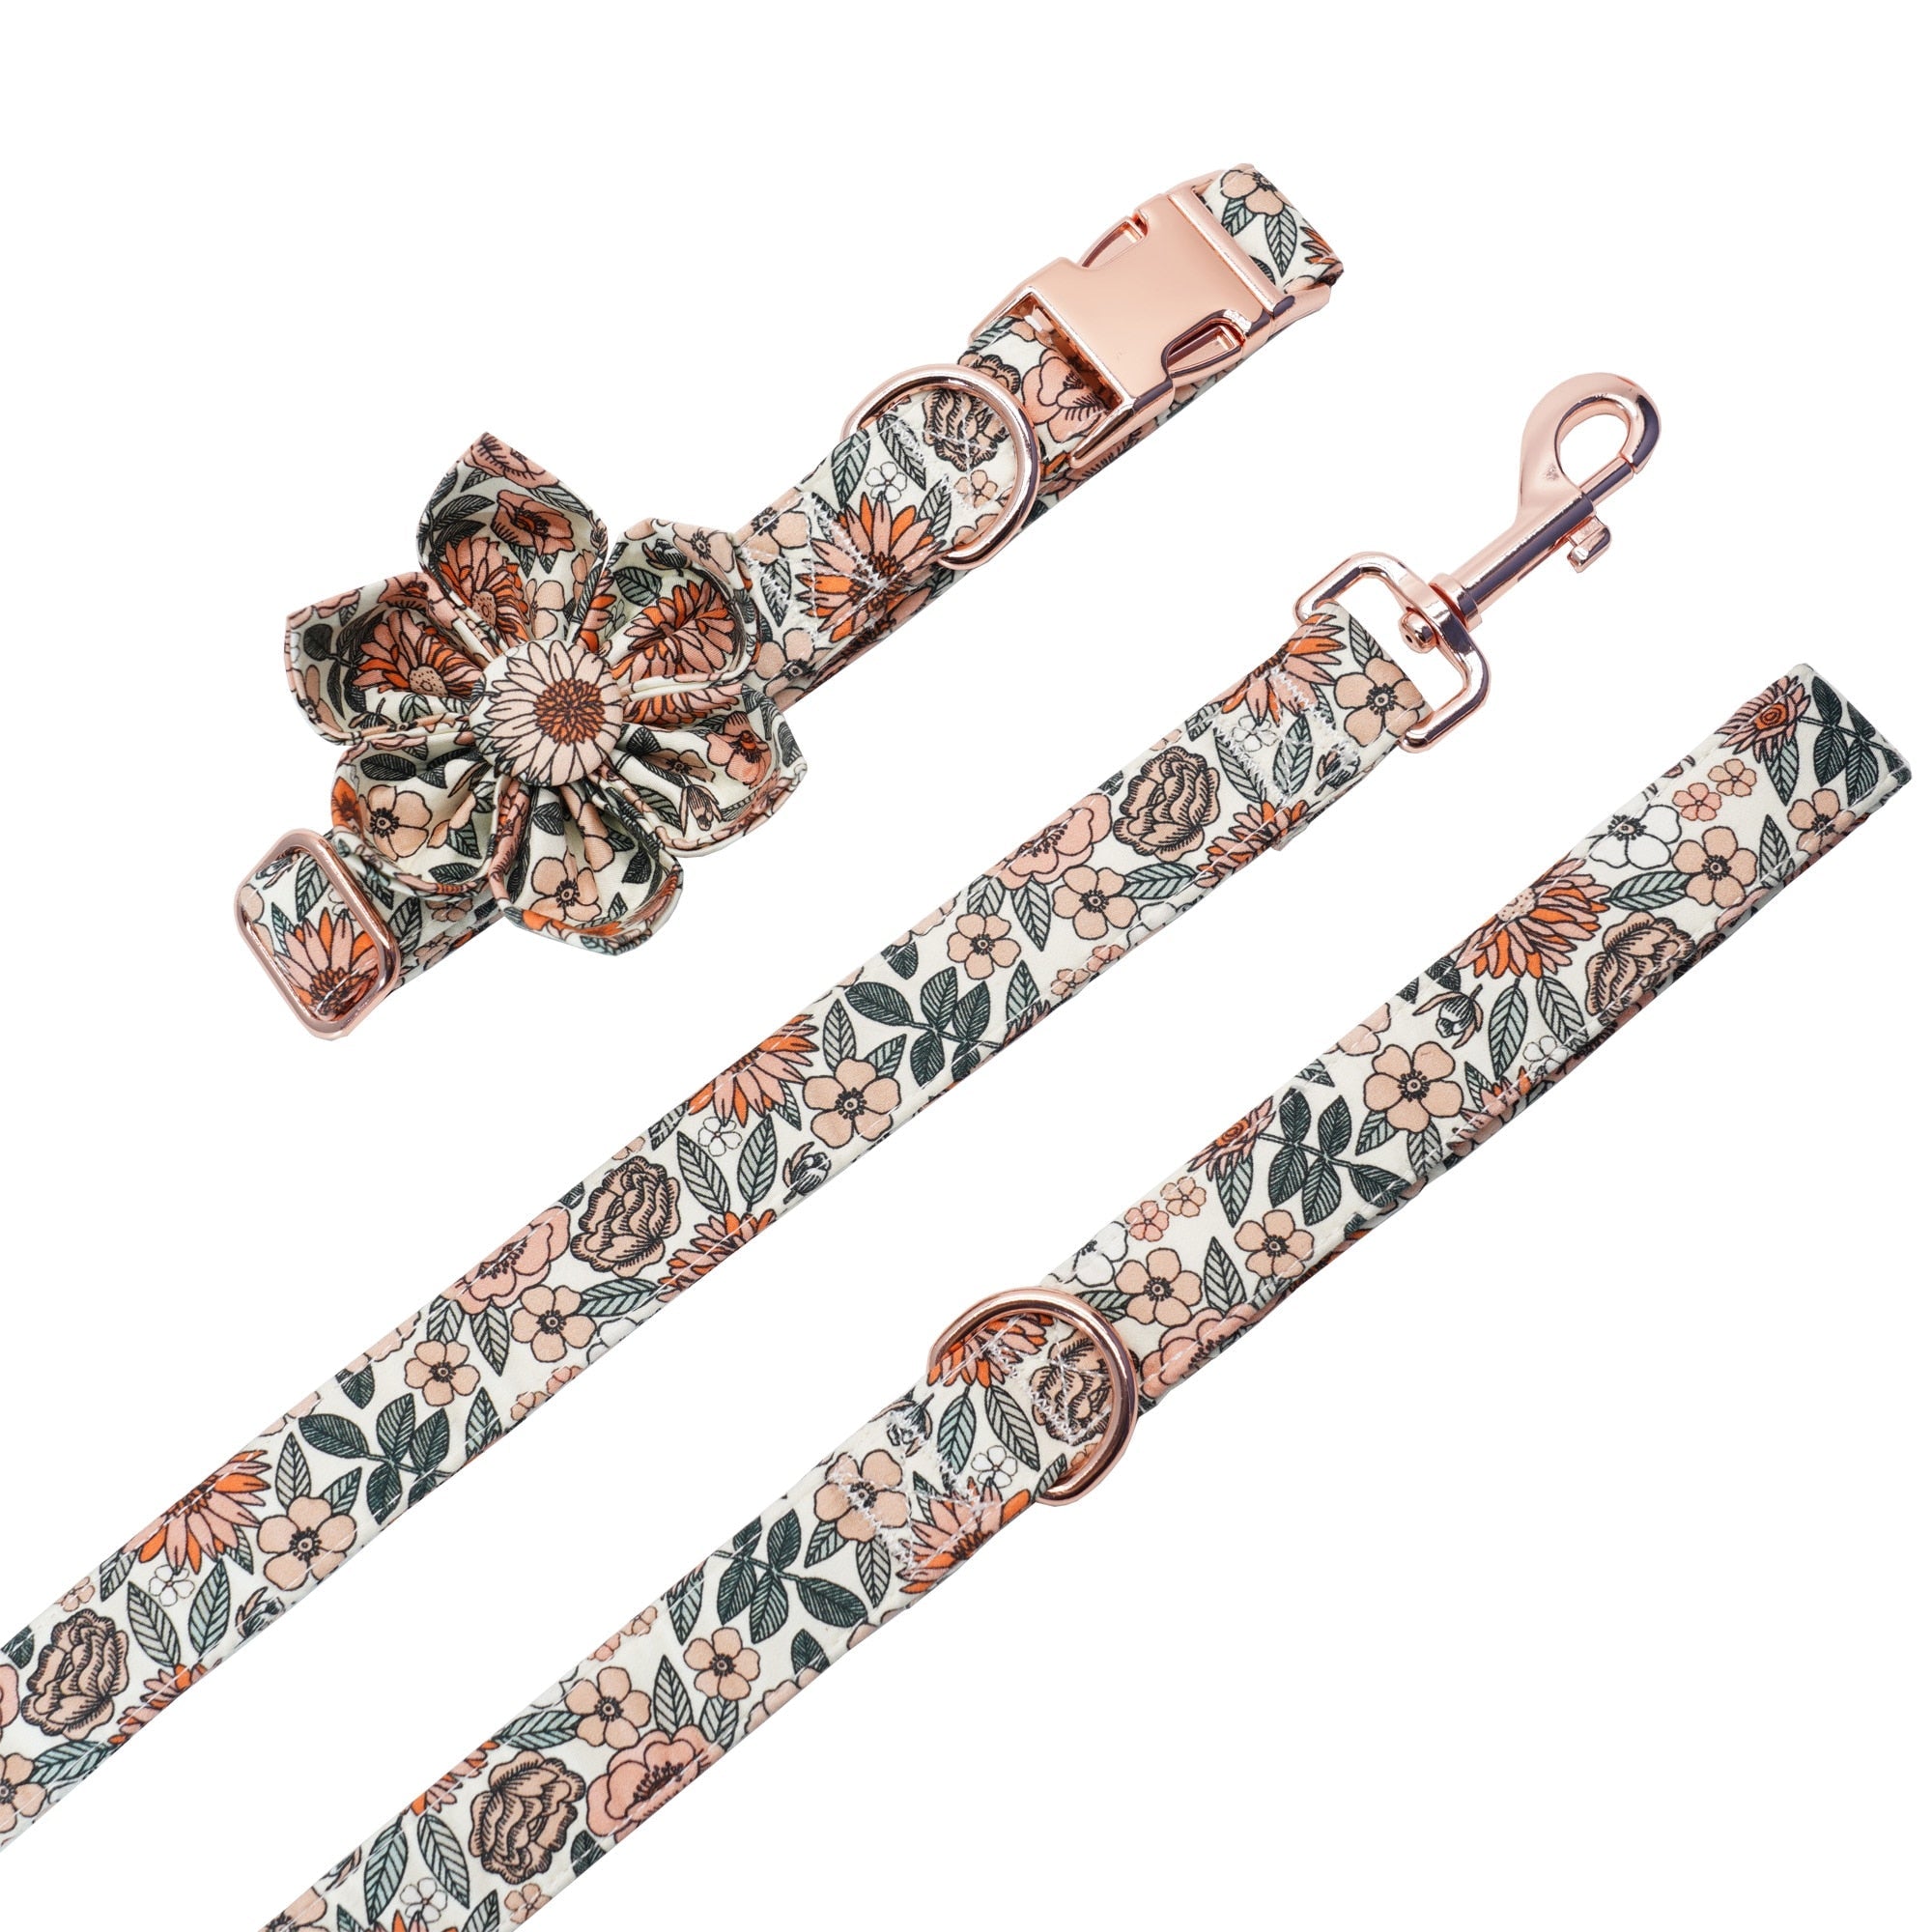 Boho Floral Flower Collar And Leash: Personalized Flower Collar And Leash Set